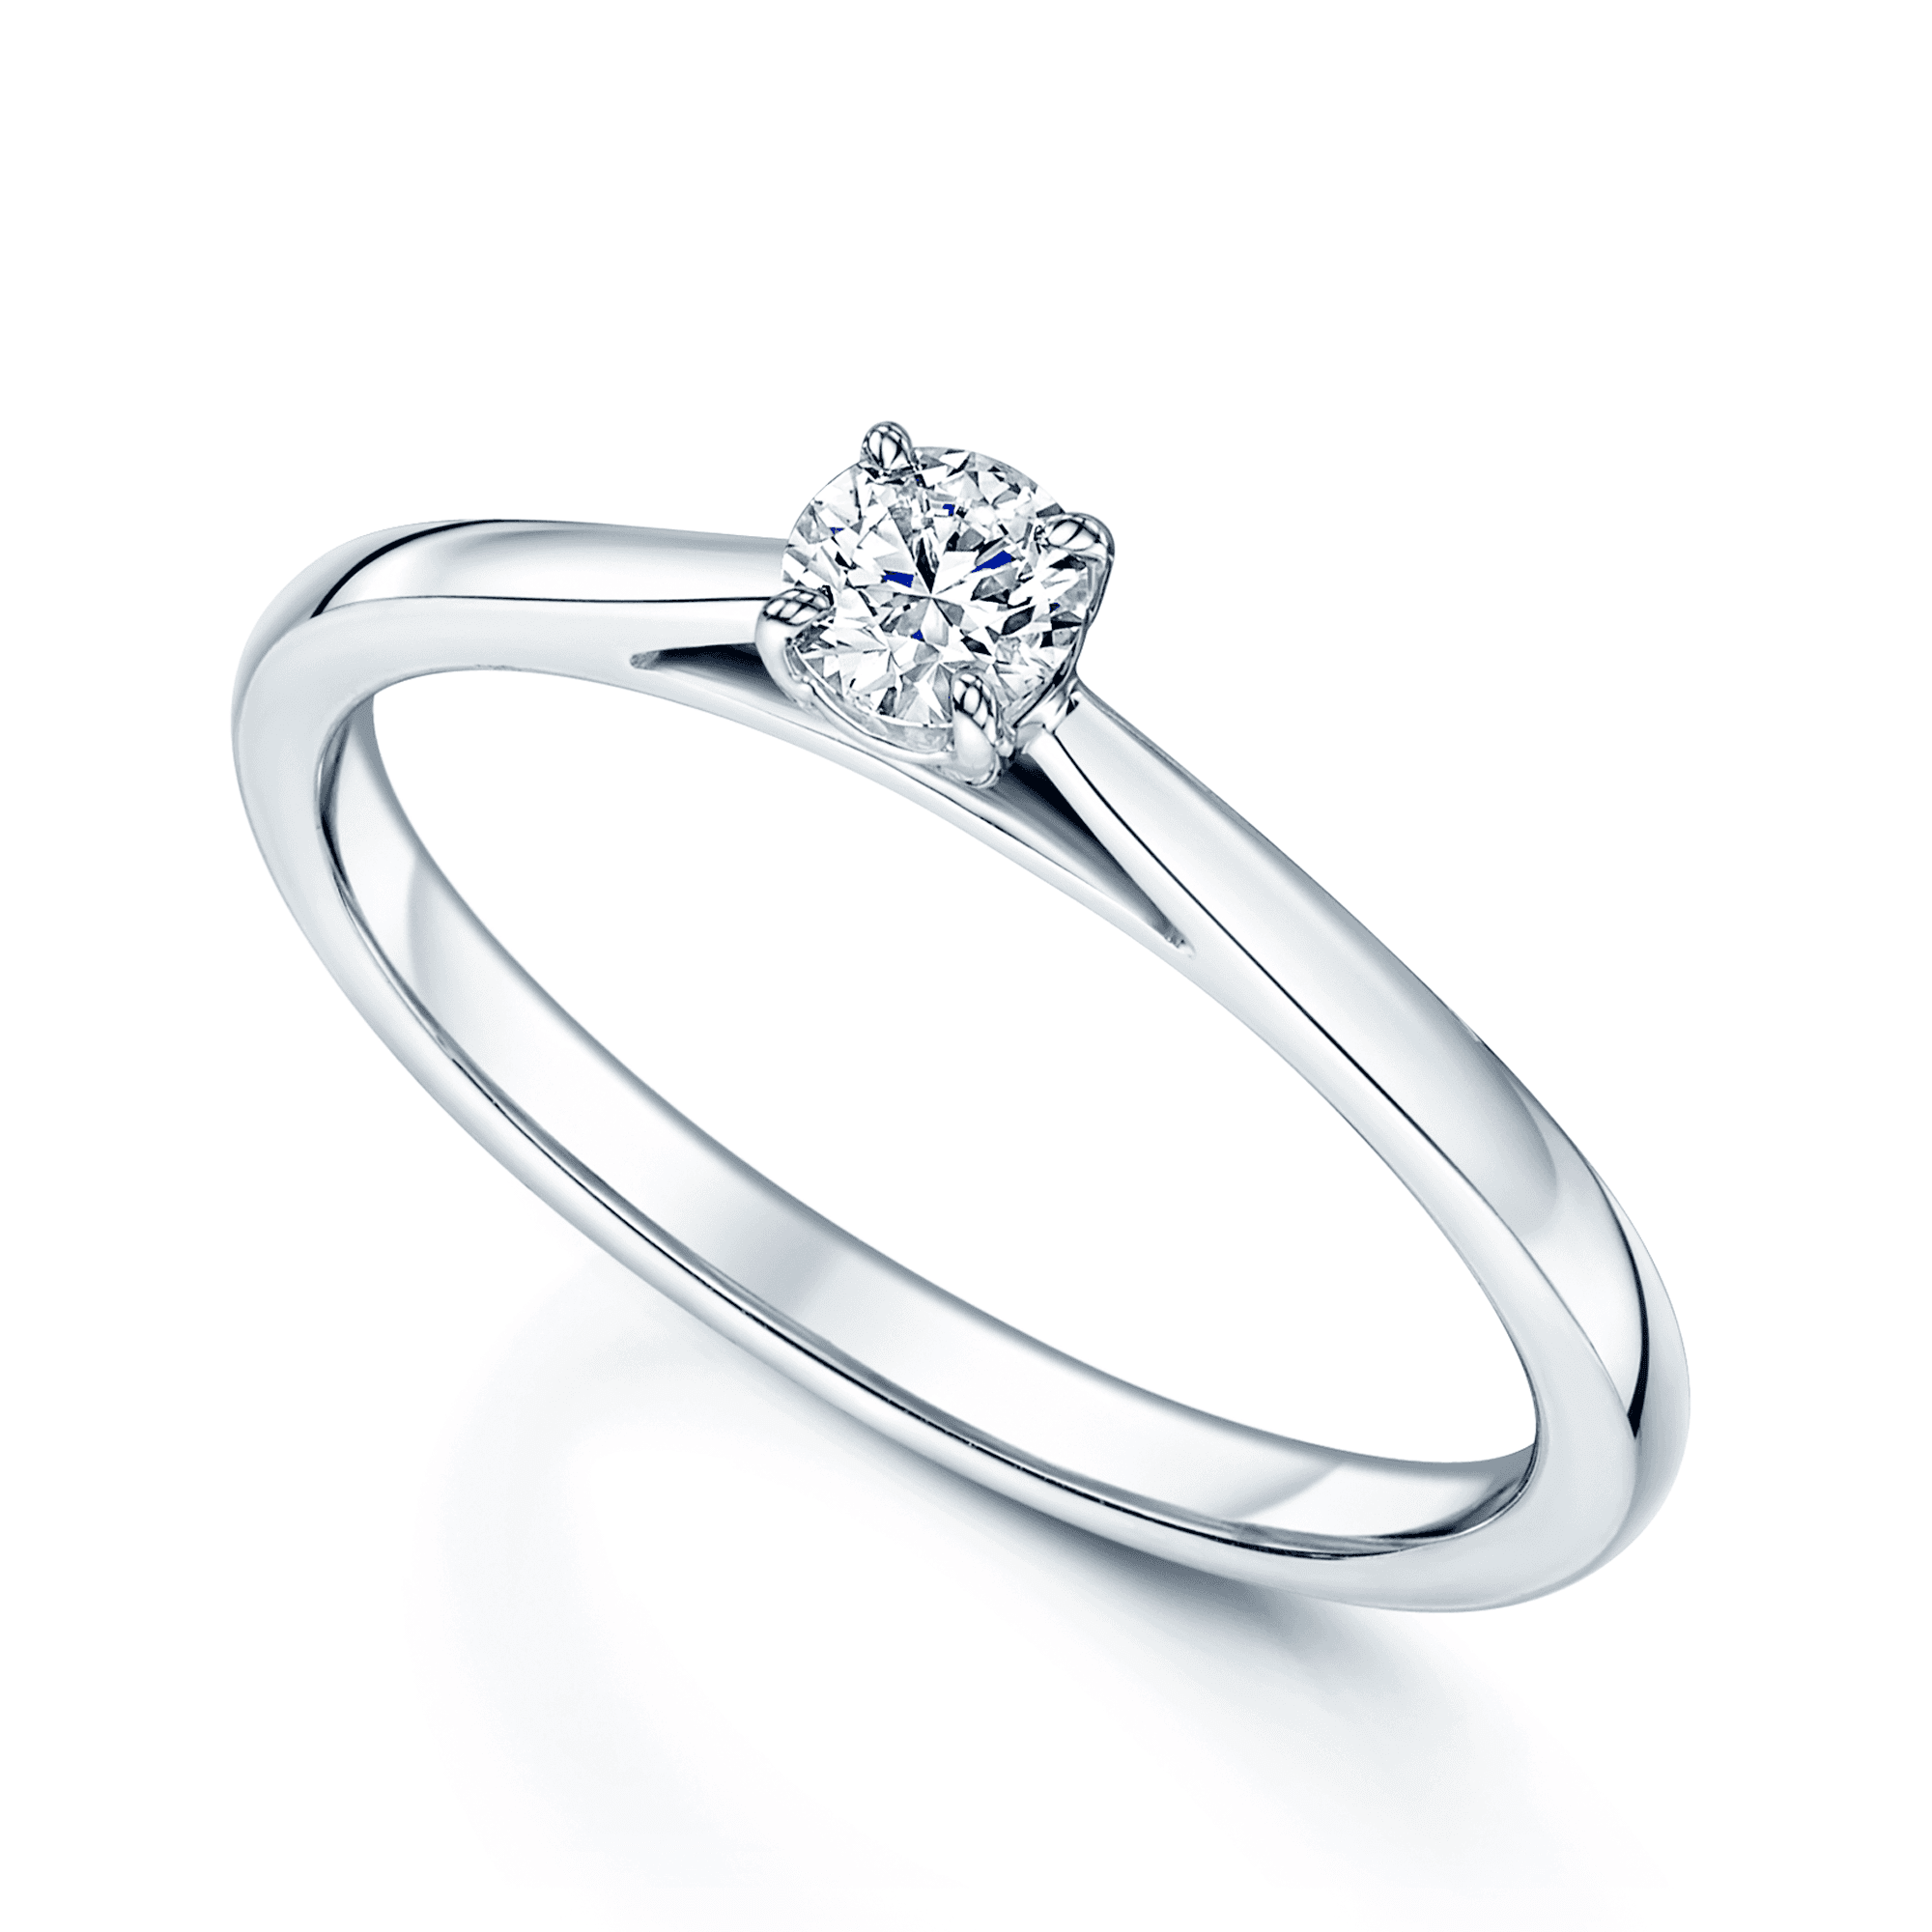 The Eve Collection Platinum GIA Certified 0.18ct Single Stone Diamond Ring